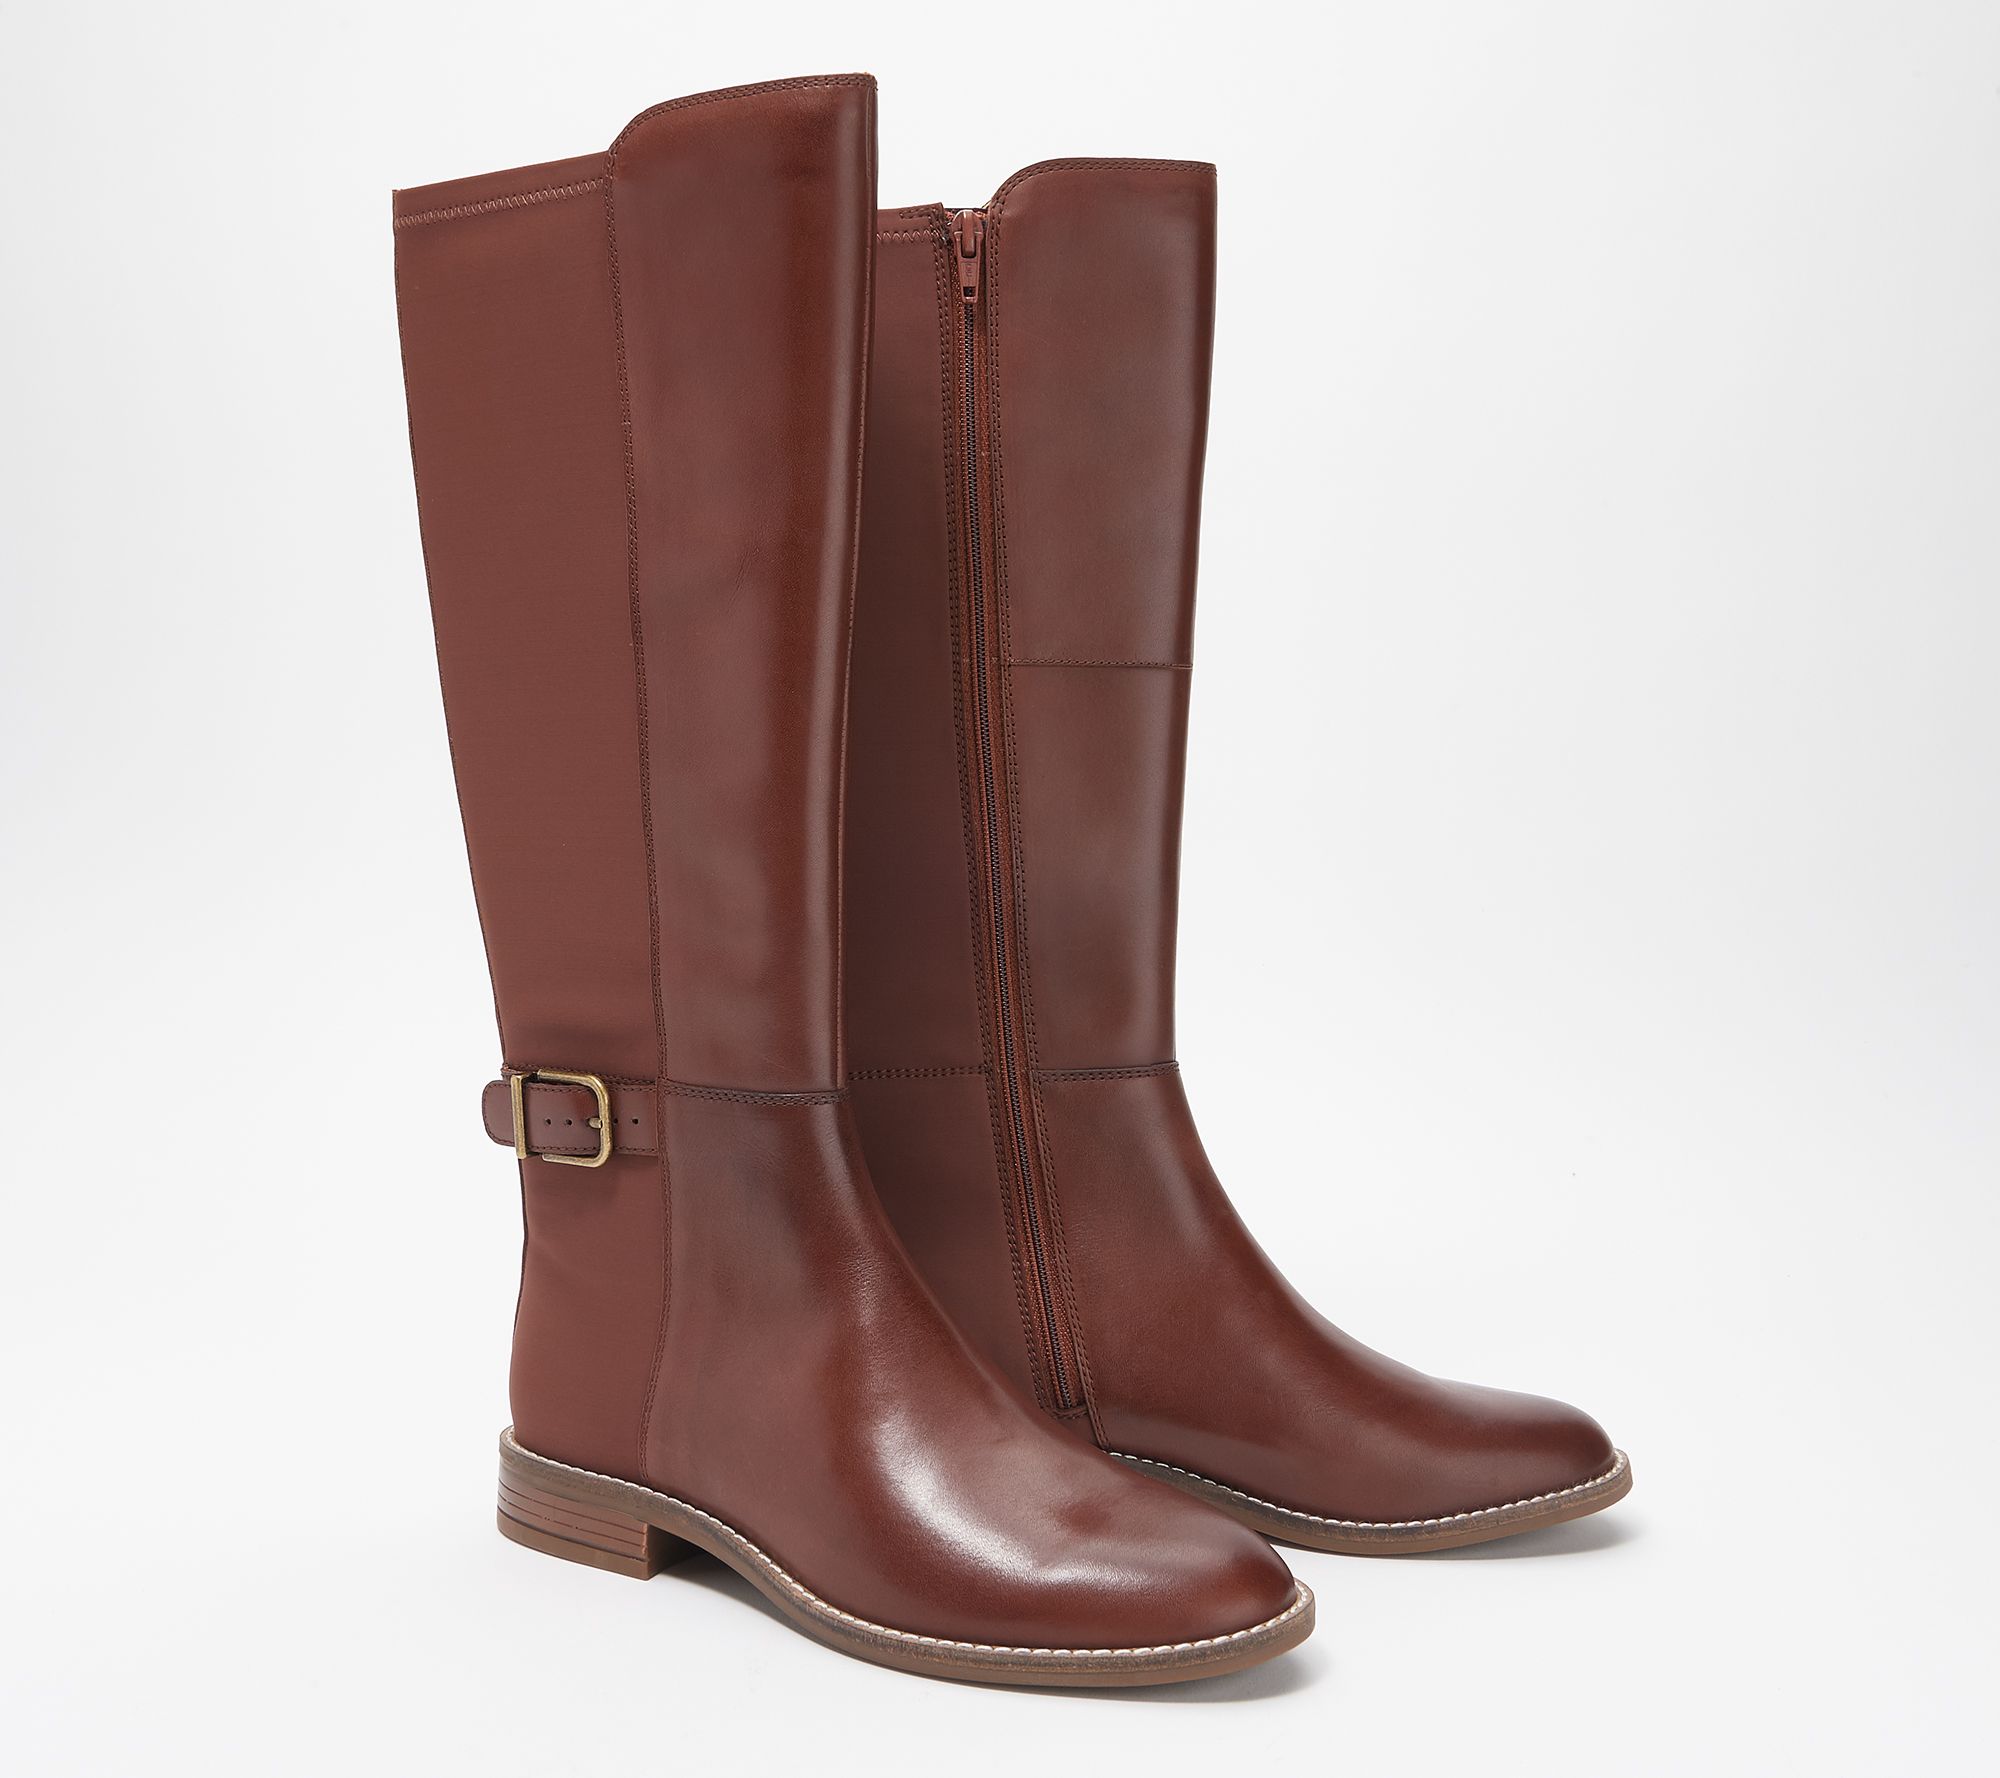 clarks riding boots canada